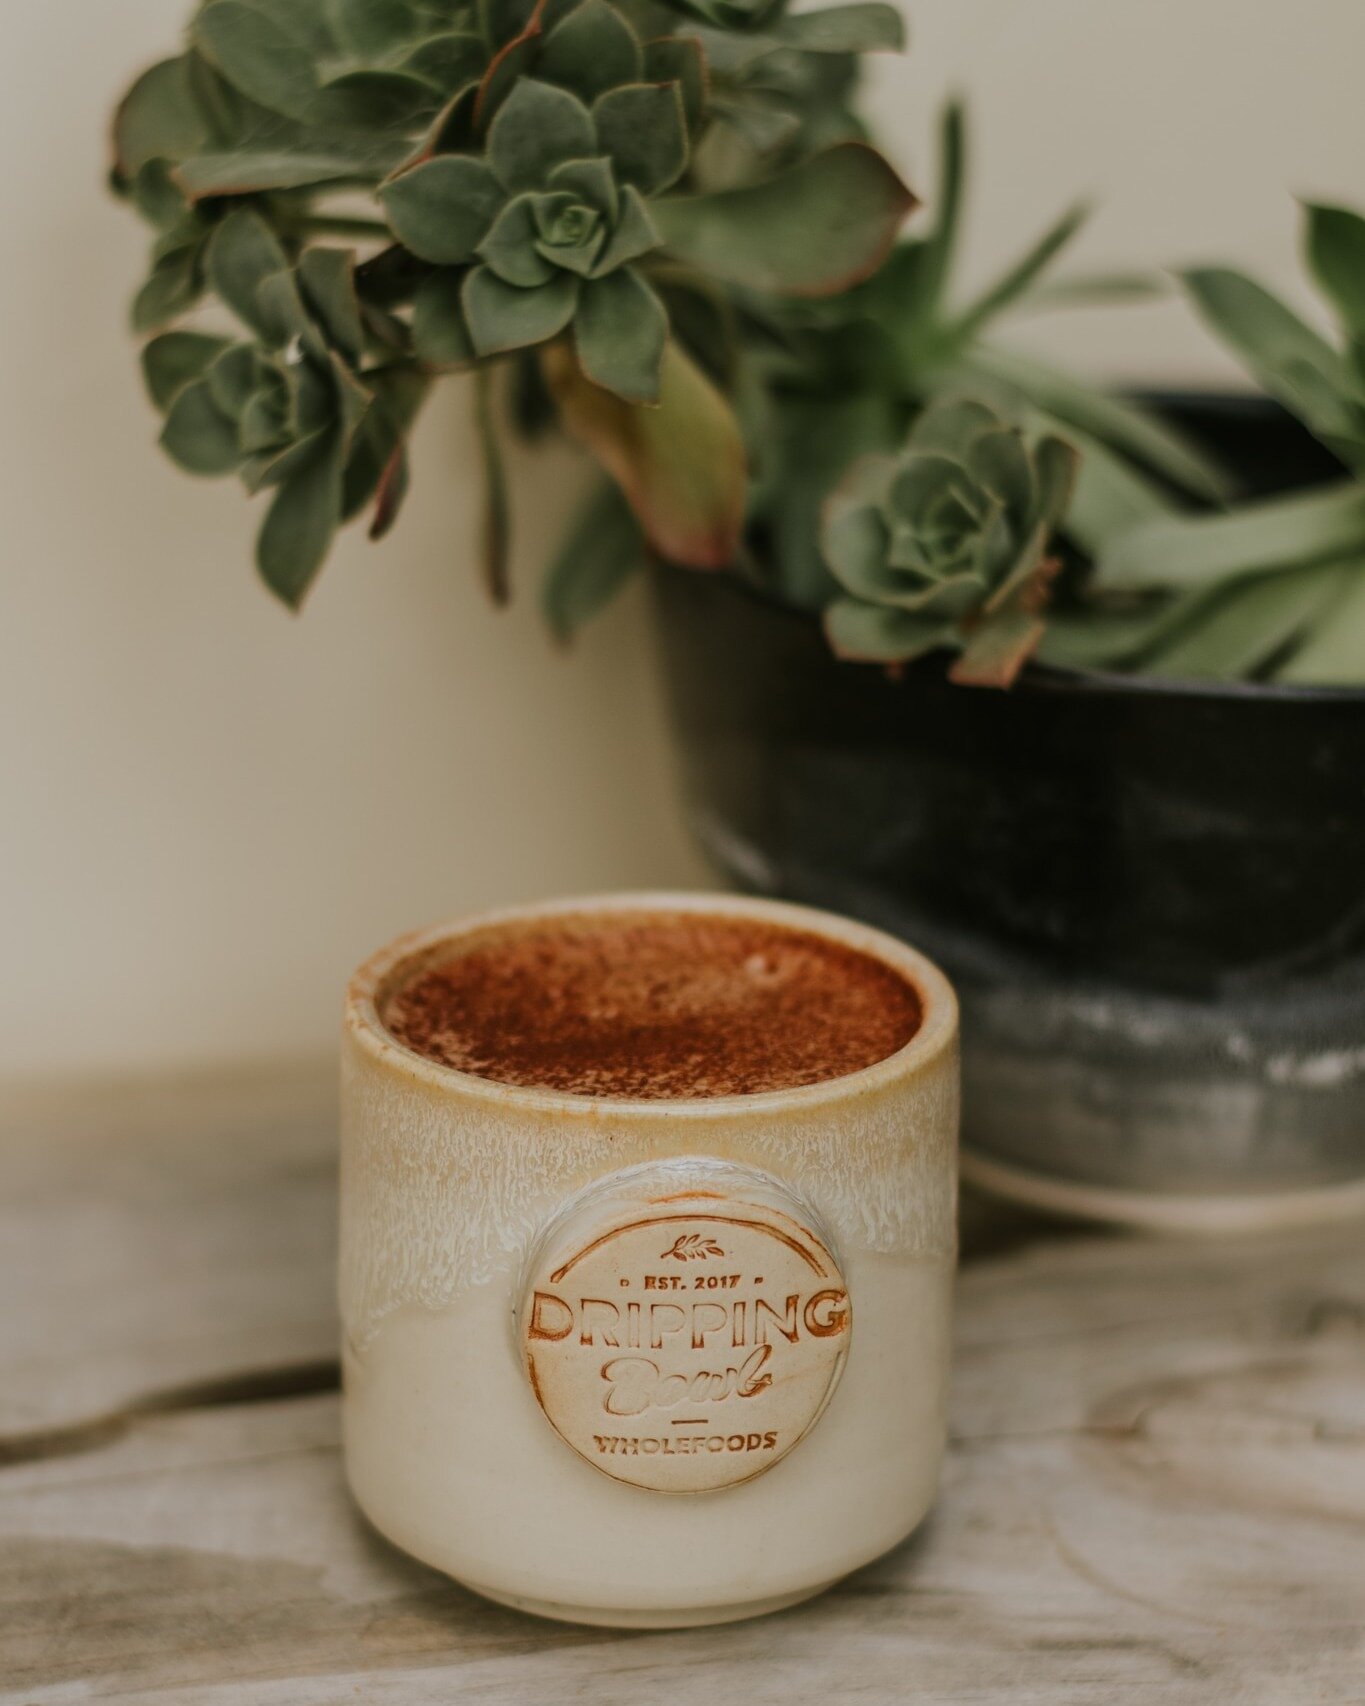 The Cacao Mushie - one of our housemade specialty tonics ✨

Our blend of warming spices, @mistydayplantpotions mushrooms &amp; steamed into 100% pure organic coconut mylk - it's the perfect warmup drink for a day like today 🌦🌧

📸 @sadhbhyo